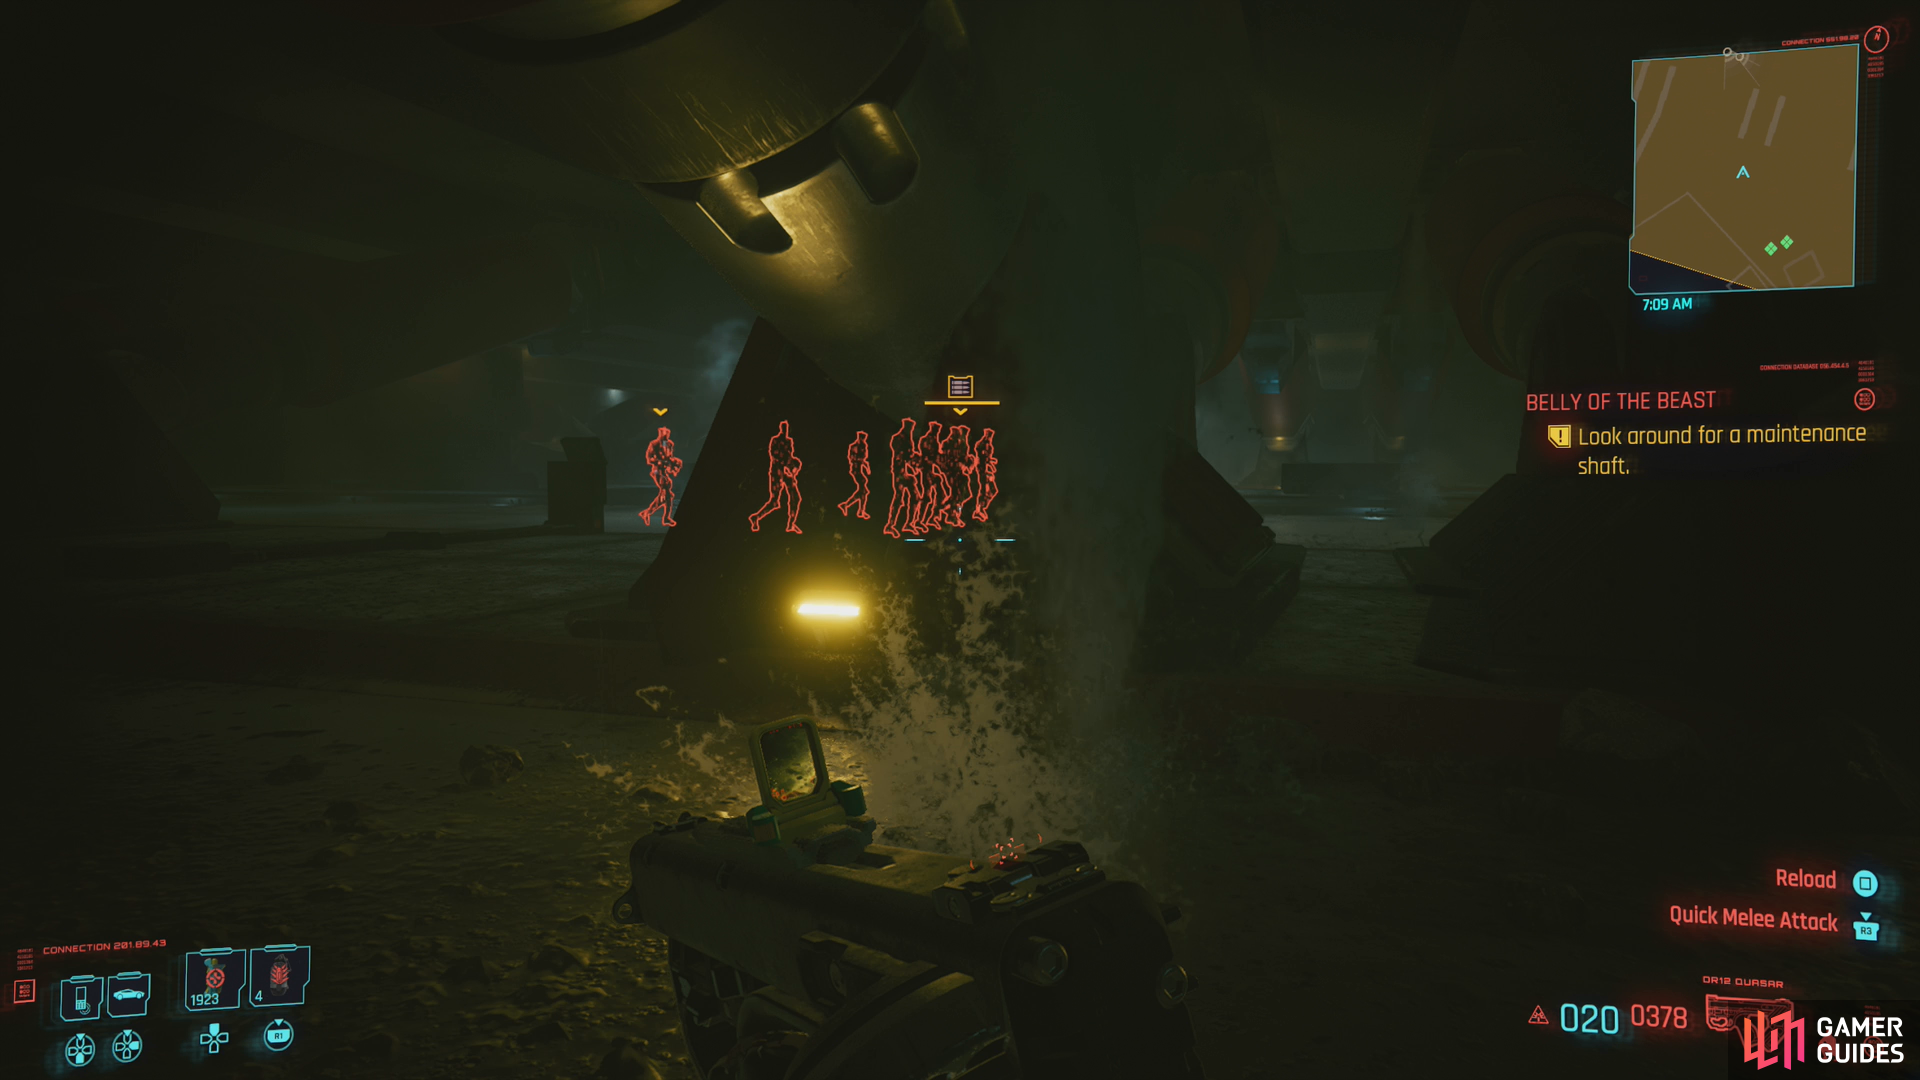 In a large underground chamber you'll find a squad of Robots patrolling - avoid them or defeat them,